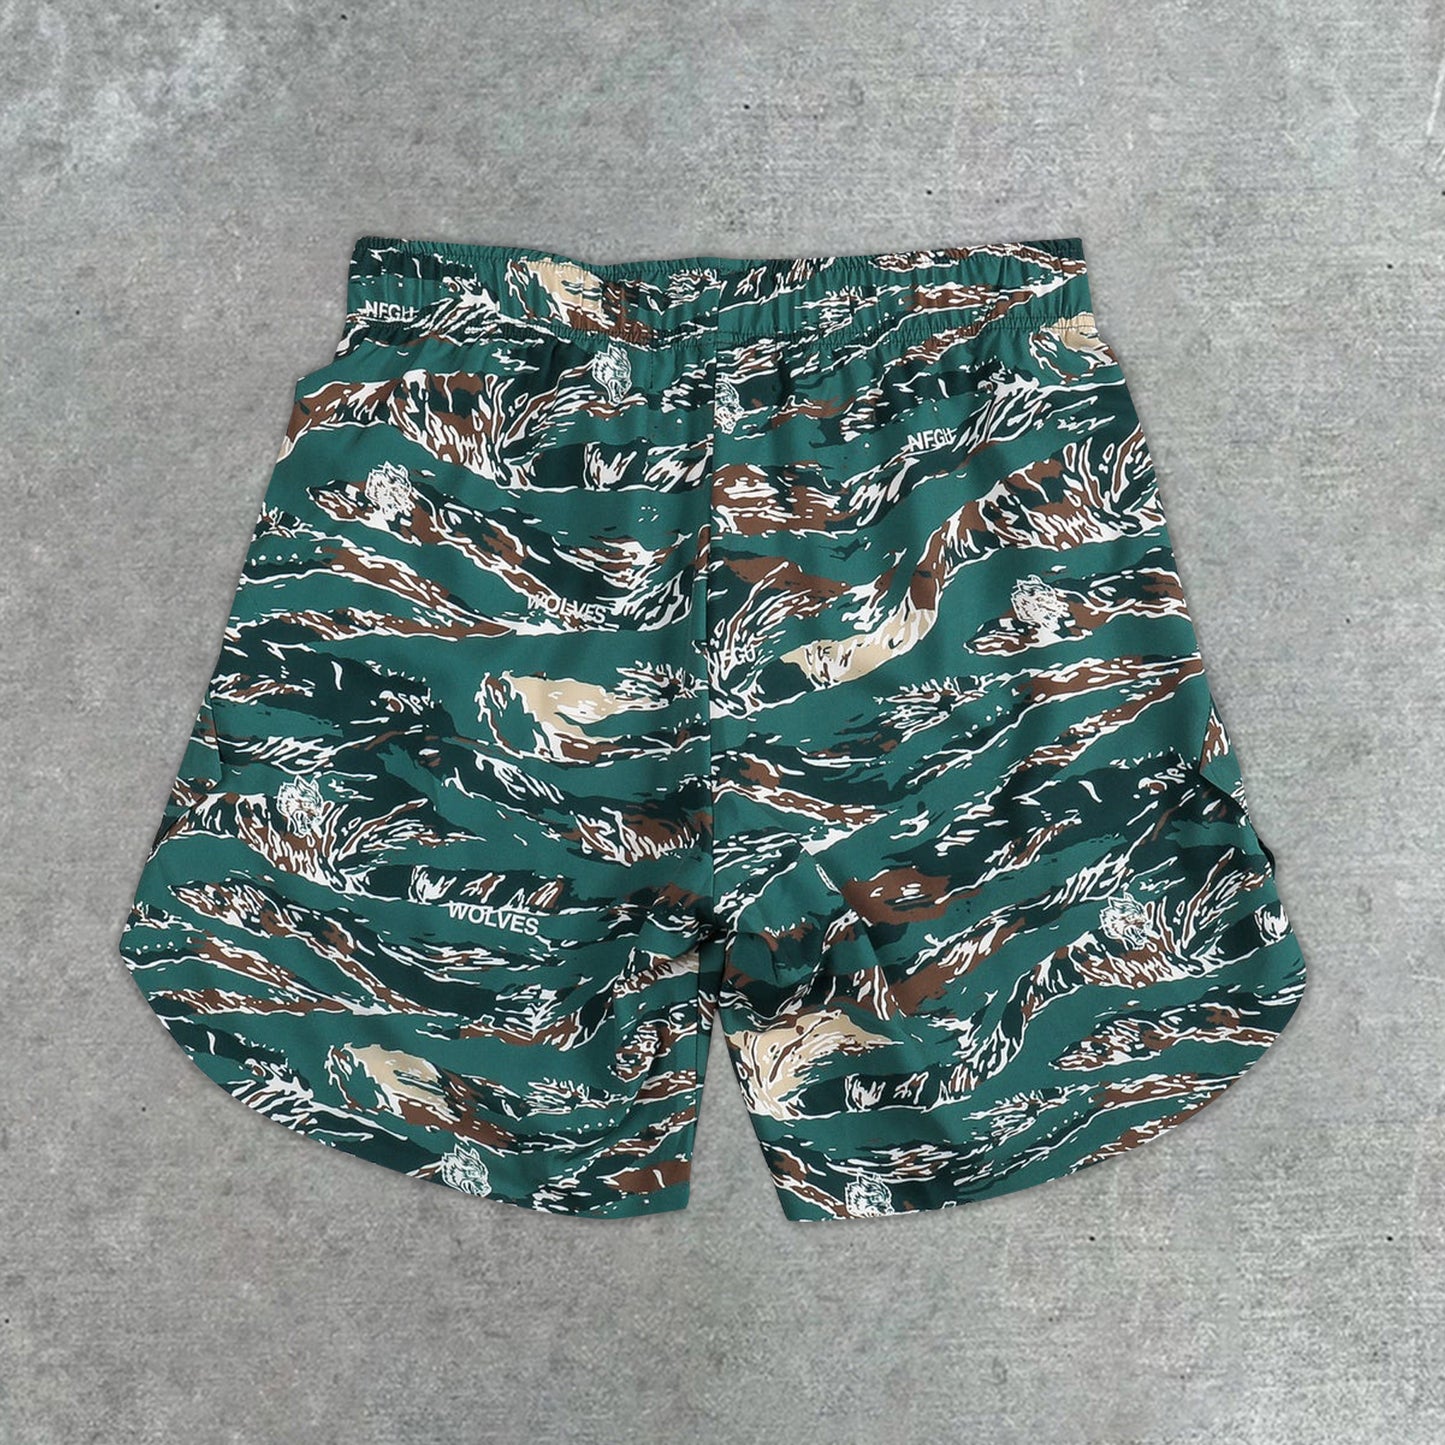 Fashion sports style fitness casual camouflage shorts